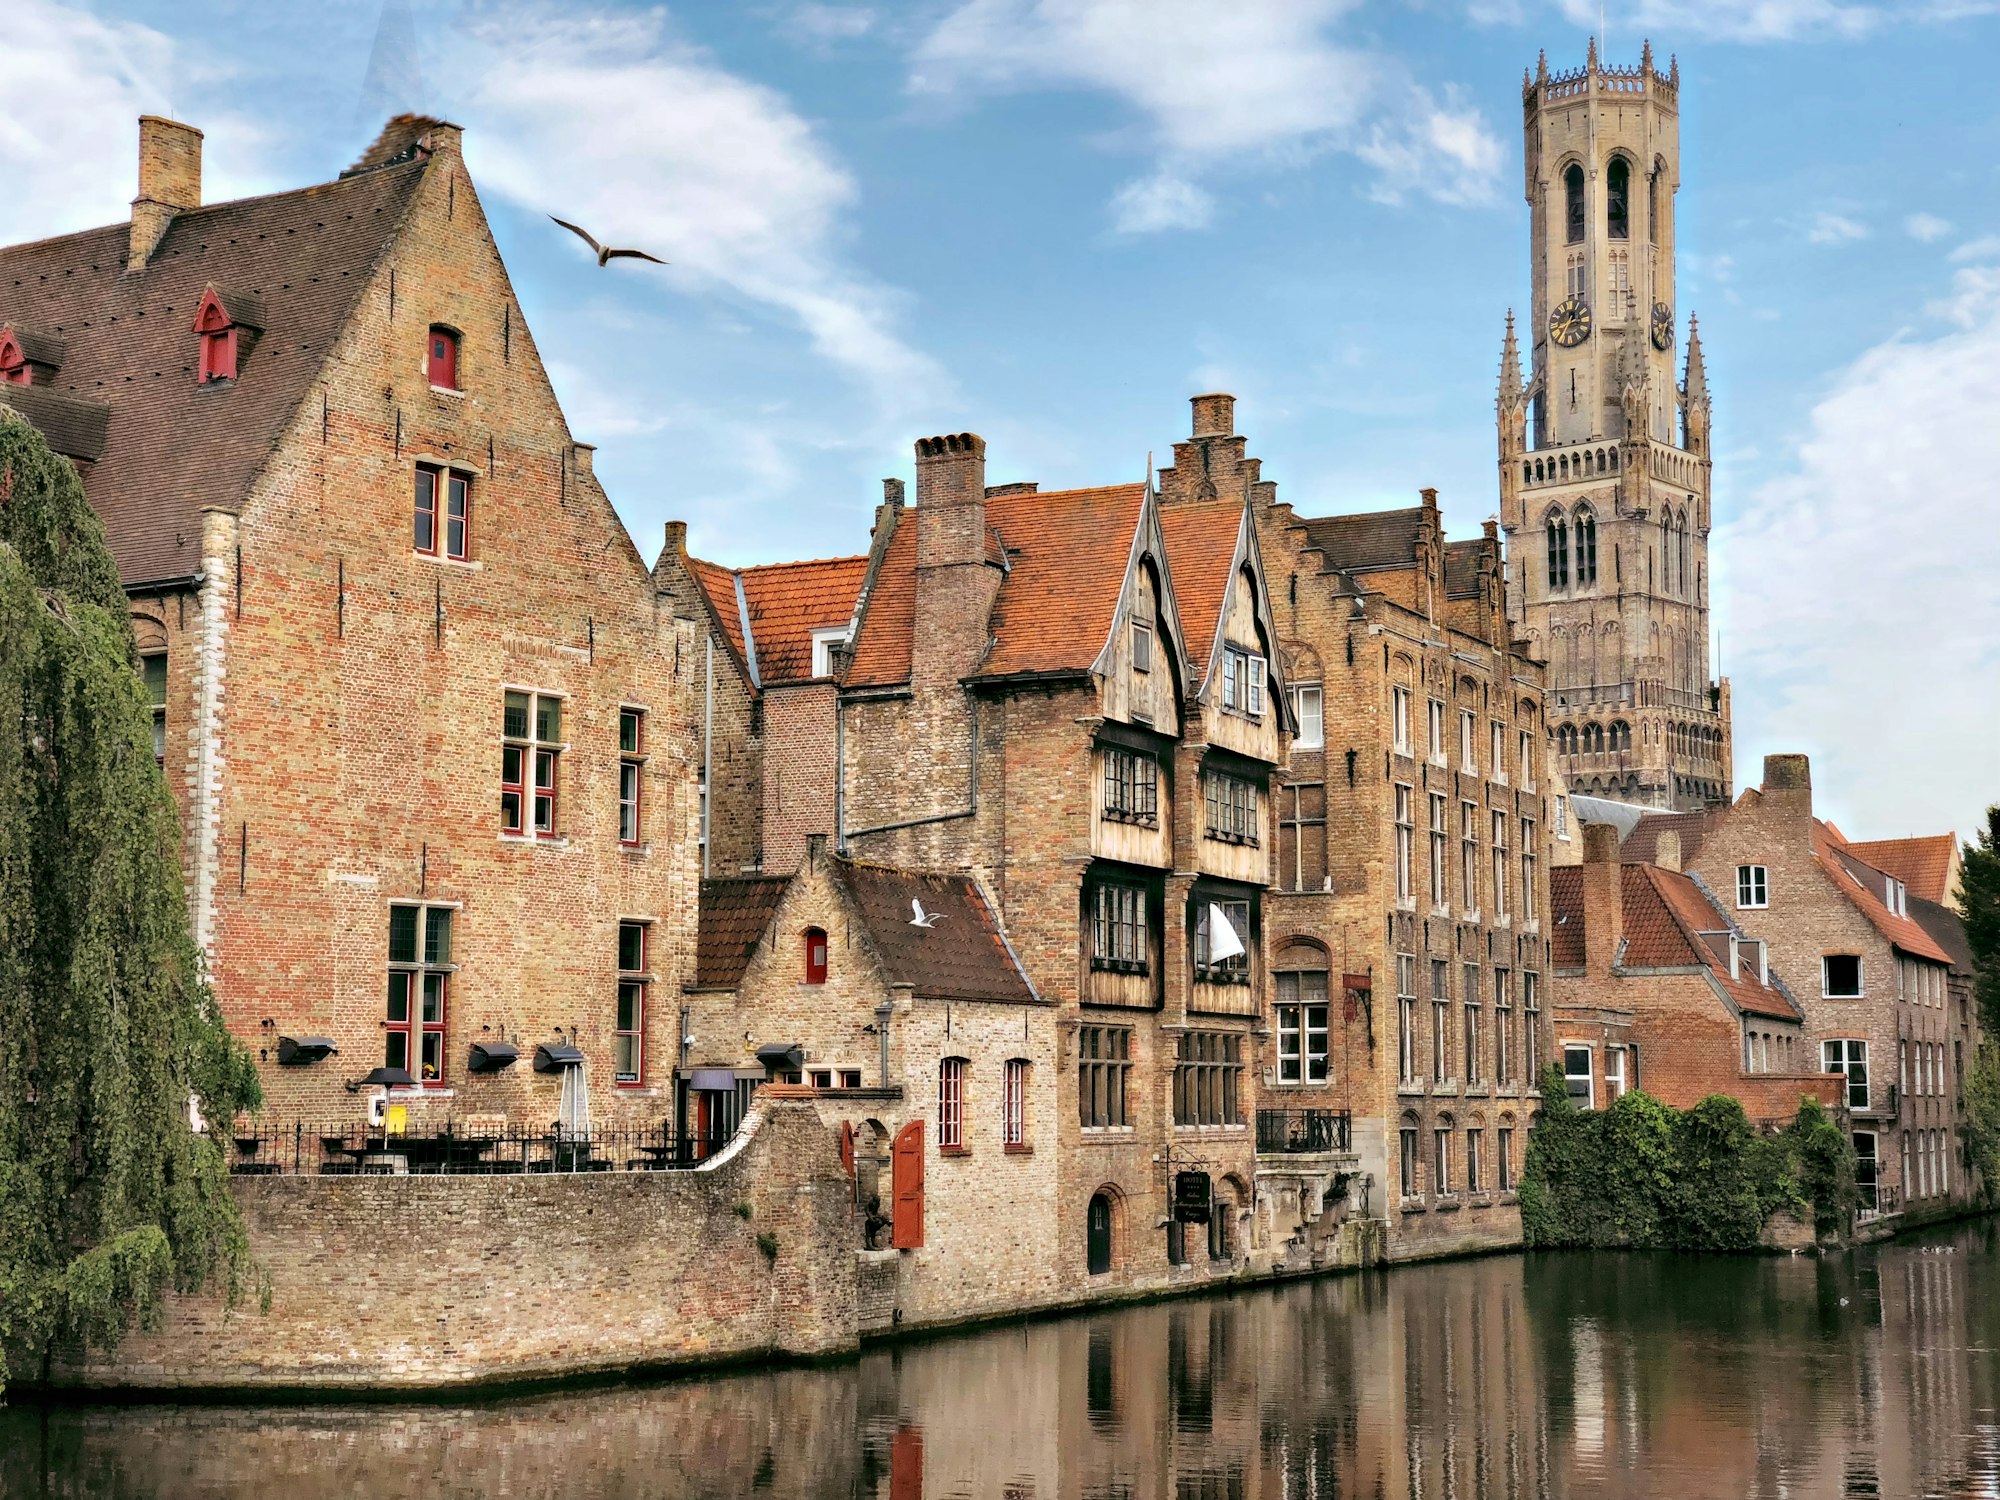 Bruges, Belgium.
Definitely one of Europe’s prettiest small towns. 